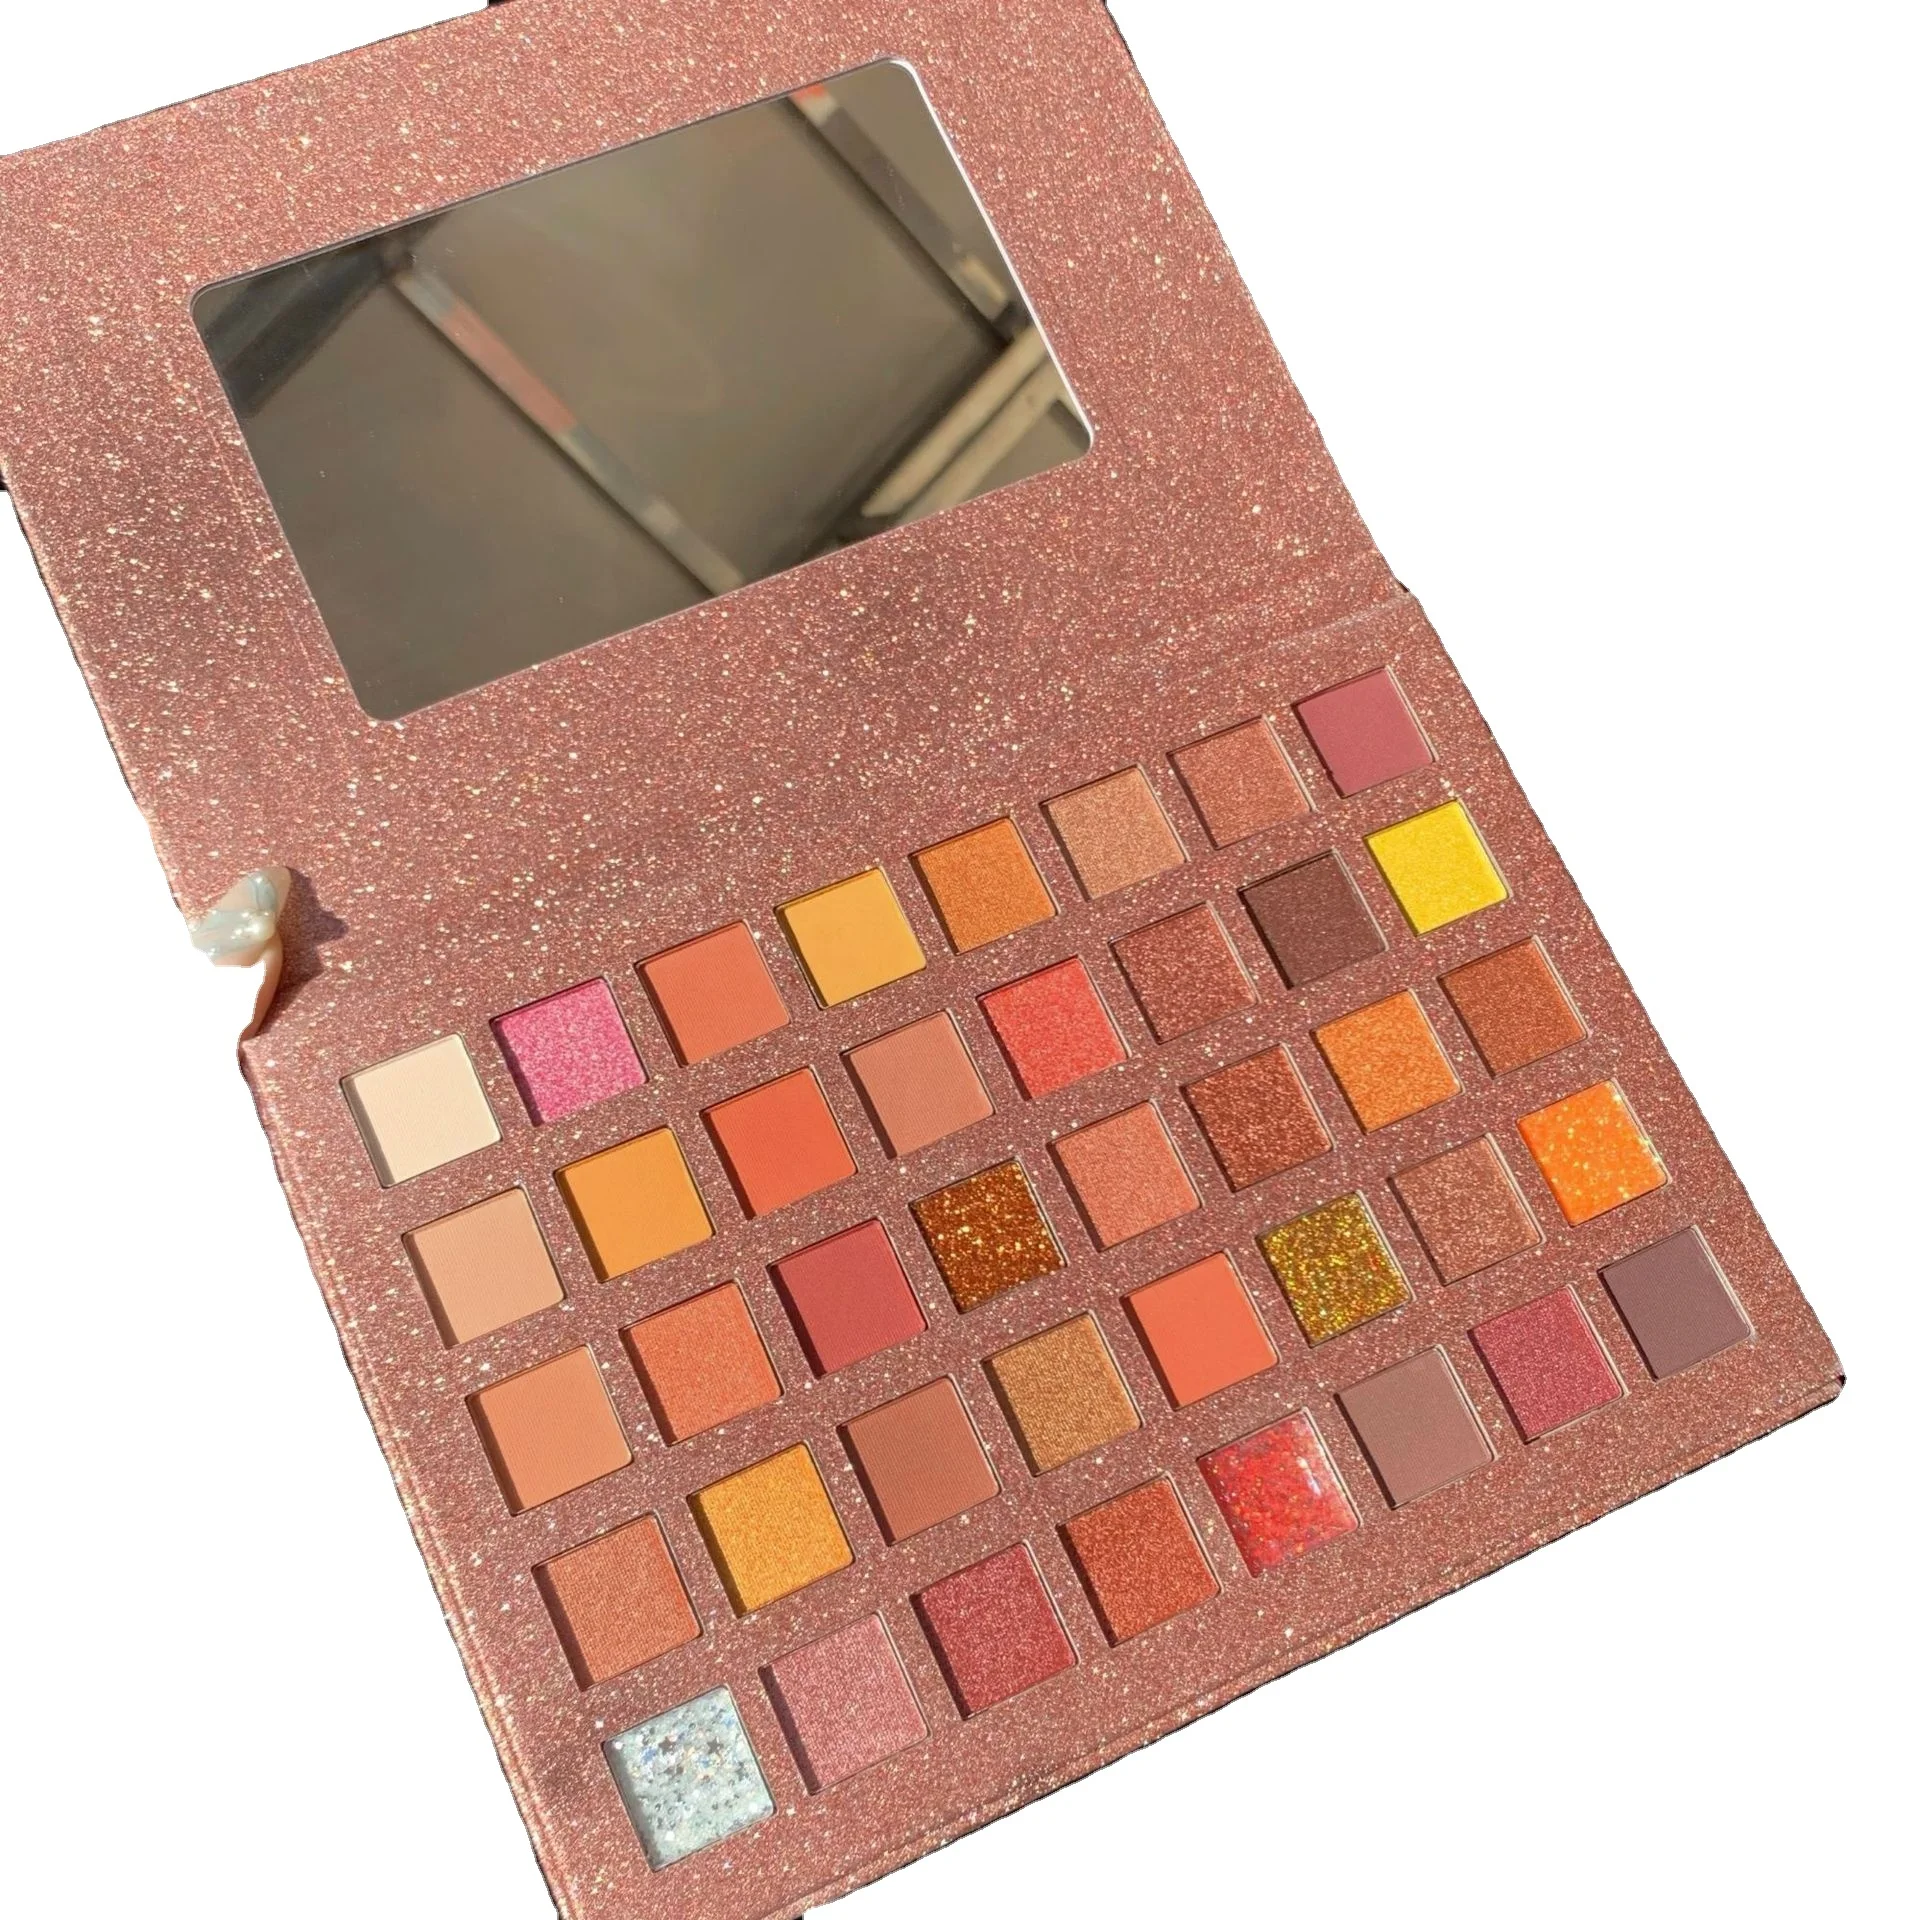 

Fawn Desert Dusk Rose Gold Pearlescent for Students Glitter Cheap Shimmer Niche Long Lasting Earth Color Eyeshadow Palette, As picture shown